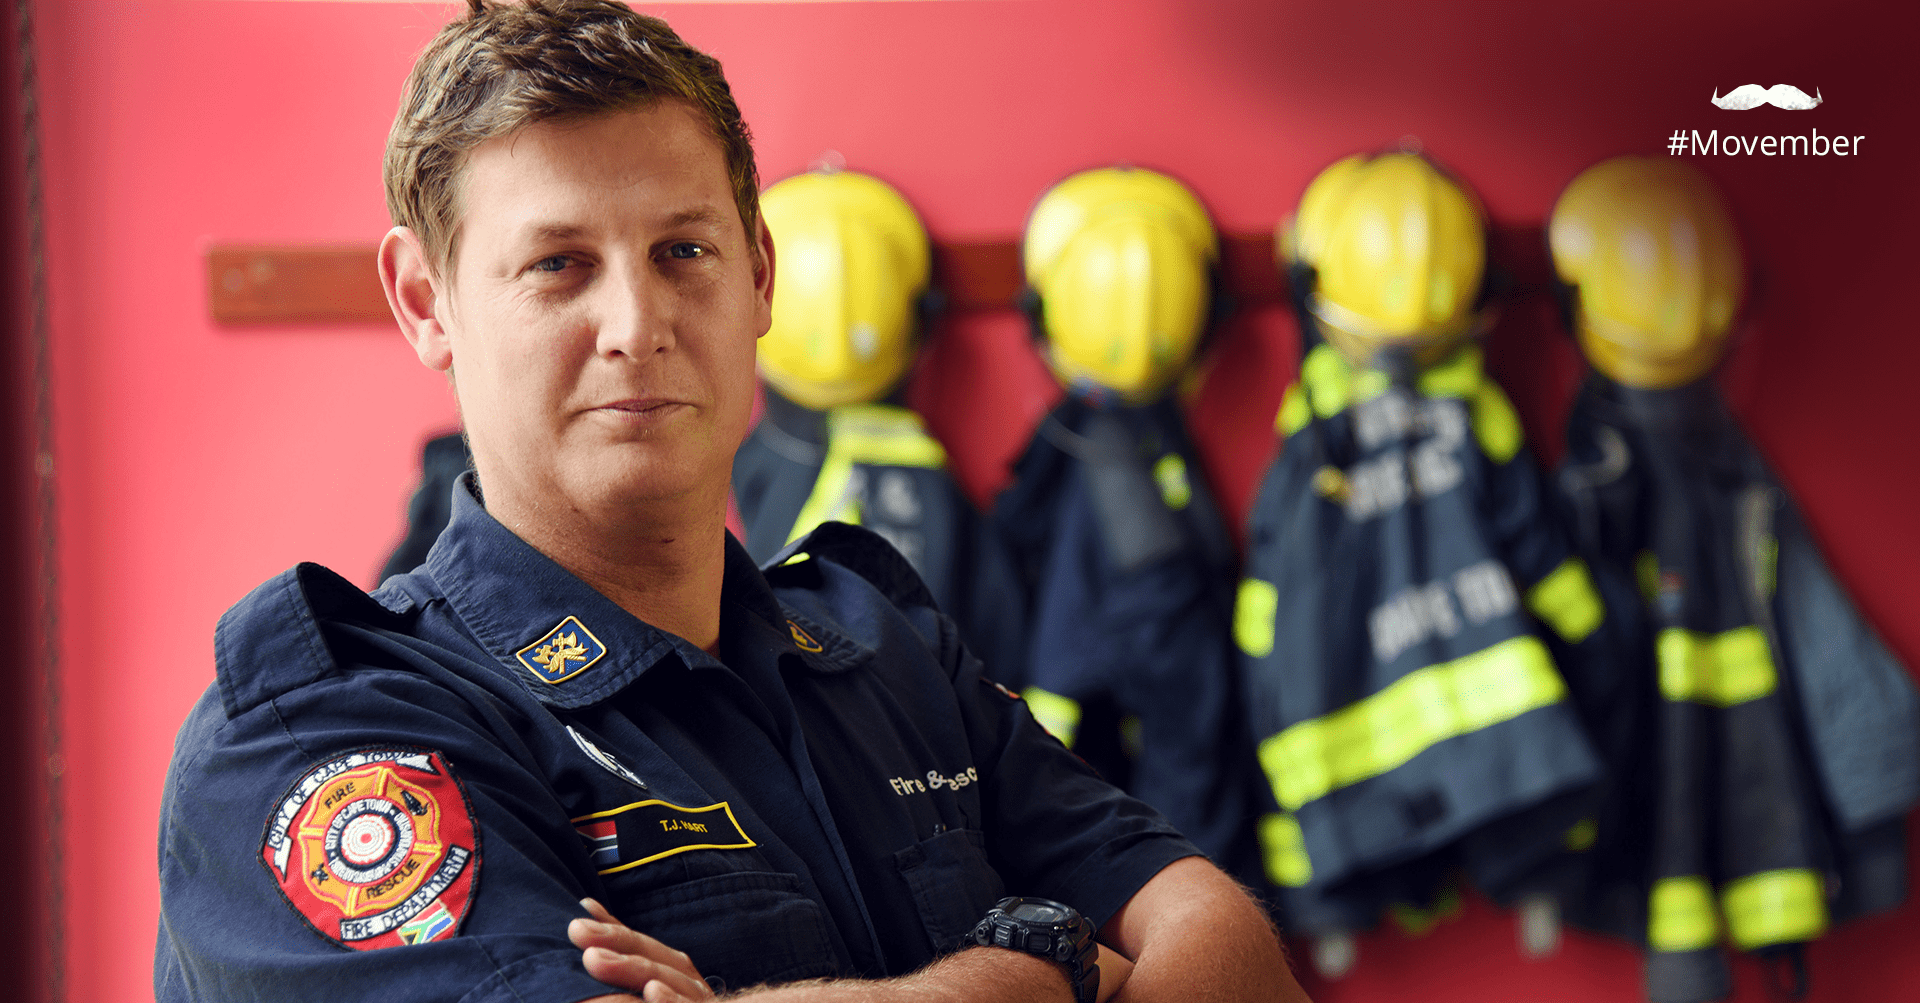 Image of man standing in front of firemen uniforms